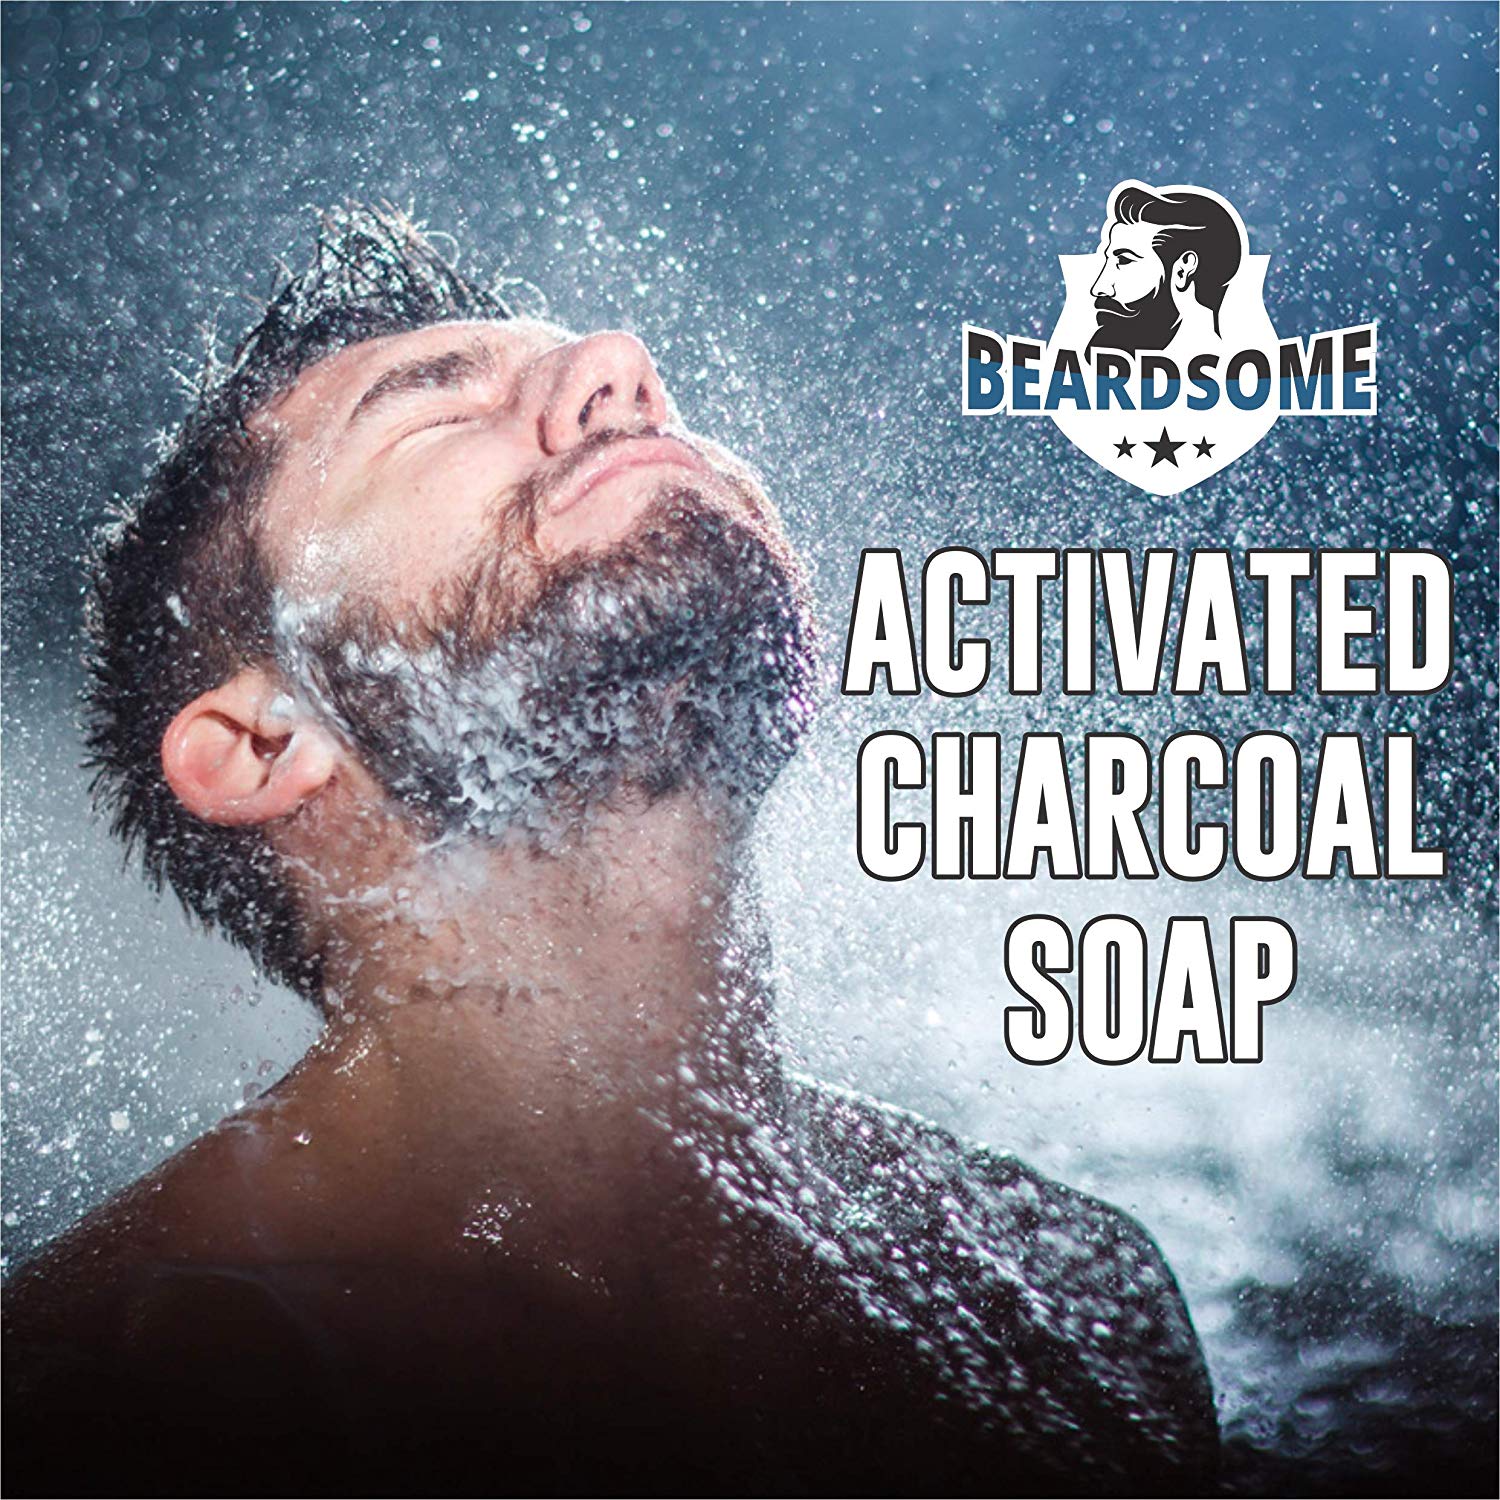 shoprythmindia Men's Grooming Beardsome Activated Charcoal Soap for Men